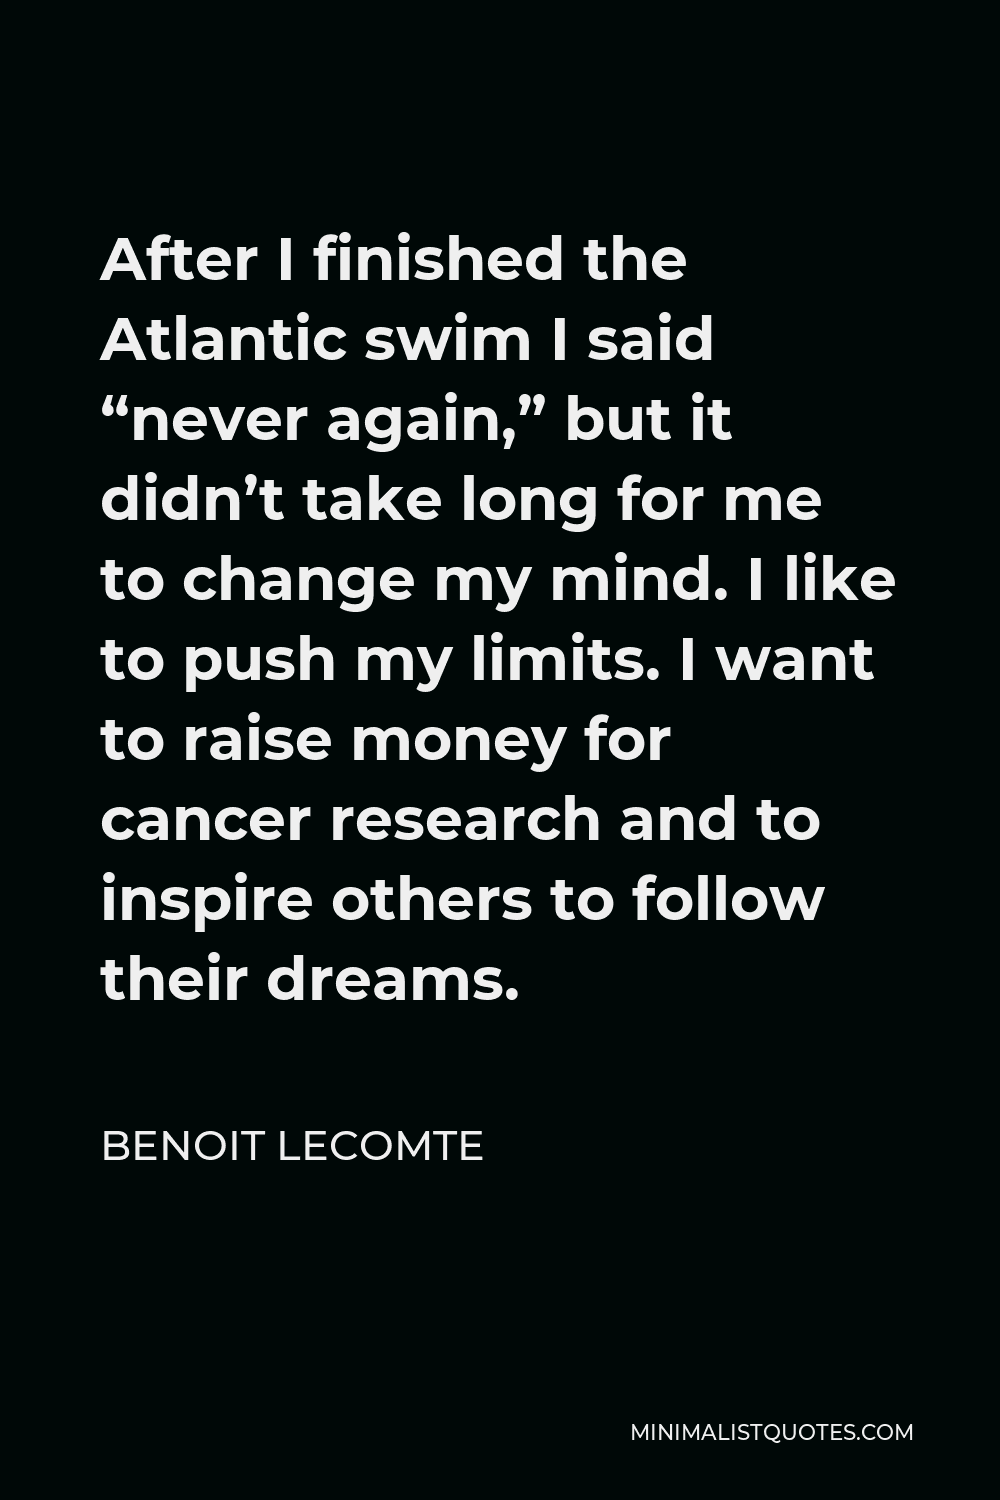 Benoit Lecomte Quote - After I finished the Atlantic swim I said “never again,” but it didn’t take long for me to change my mind. I like to push my limits. I want to raise money for cancer research and to inspire others to follow their dreams.